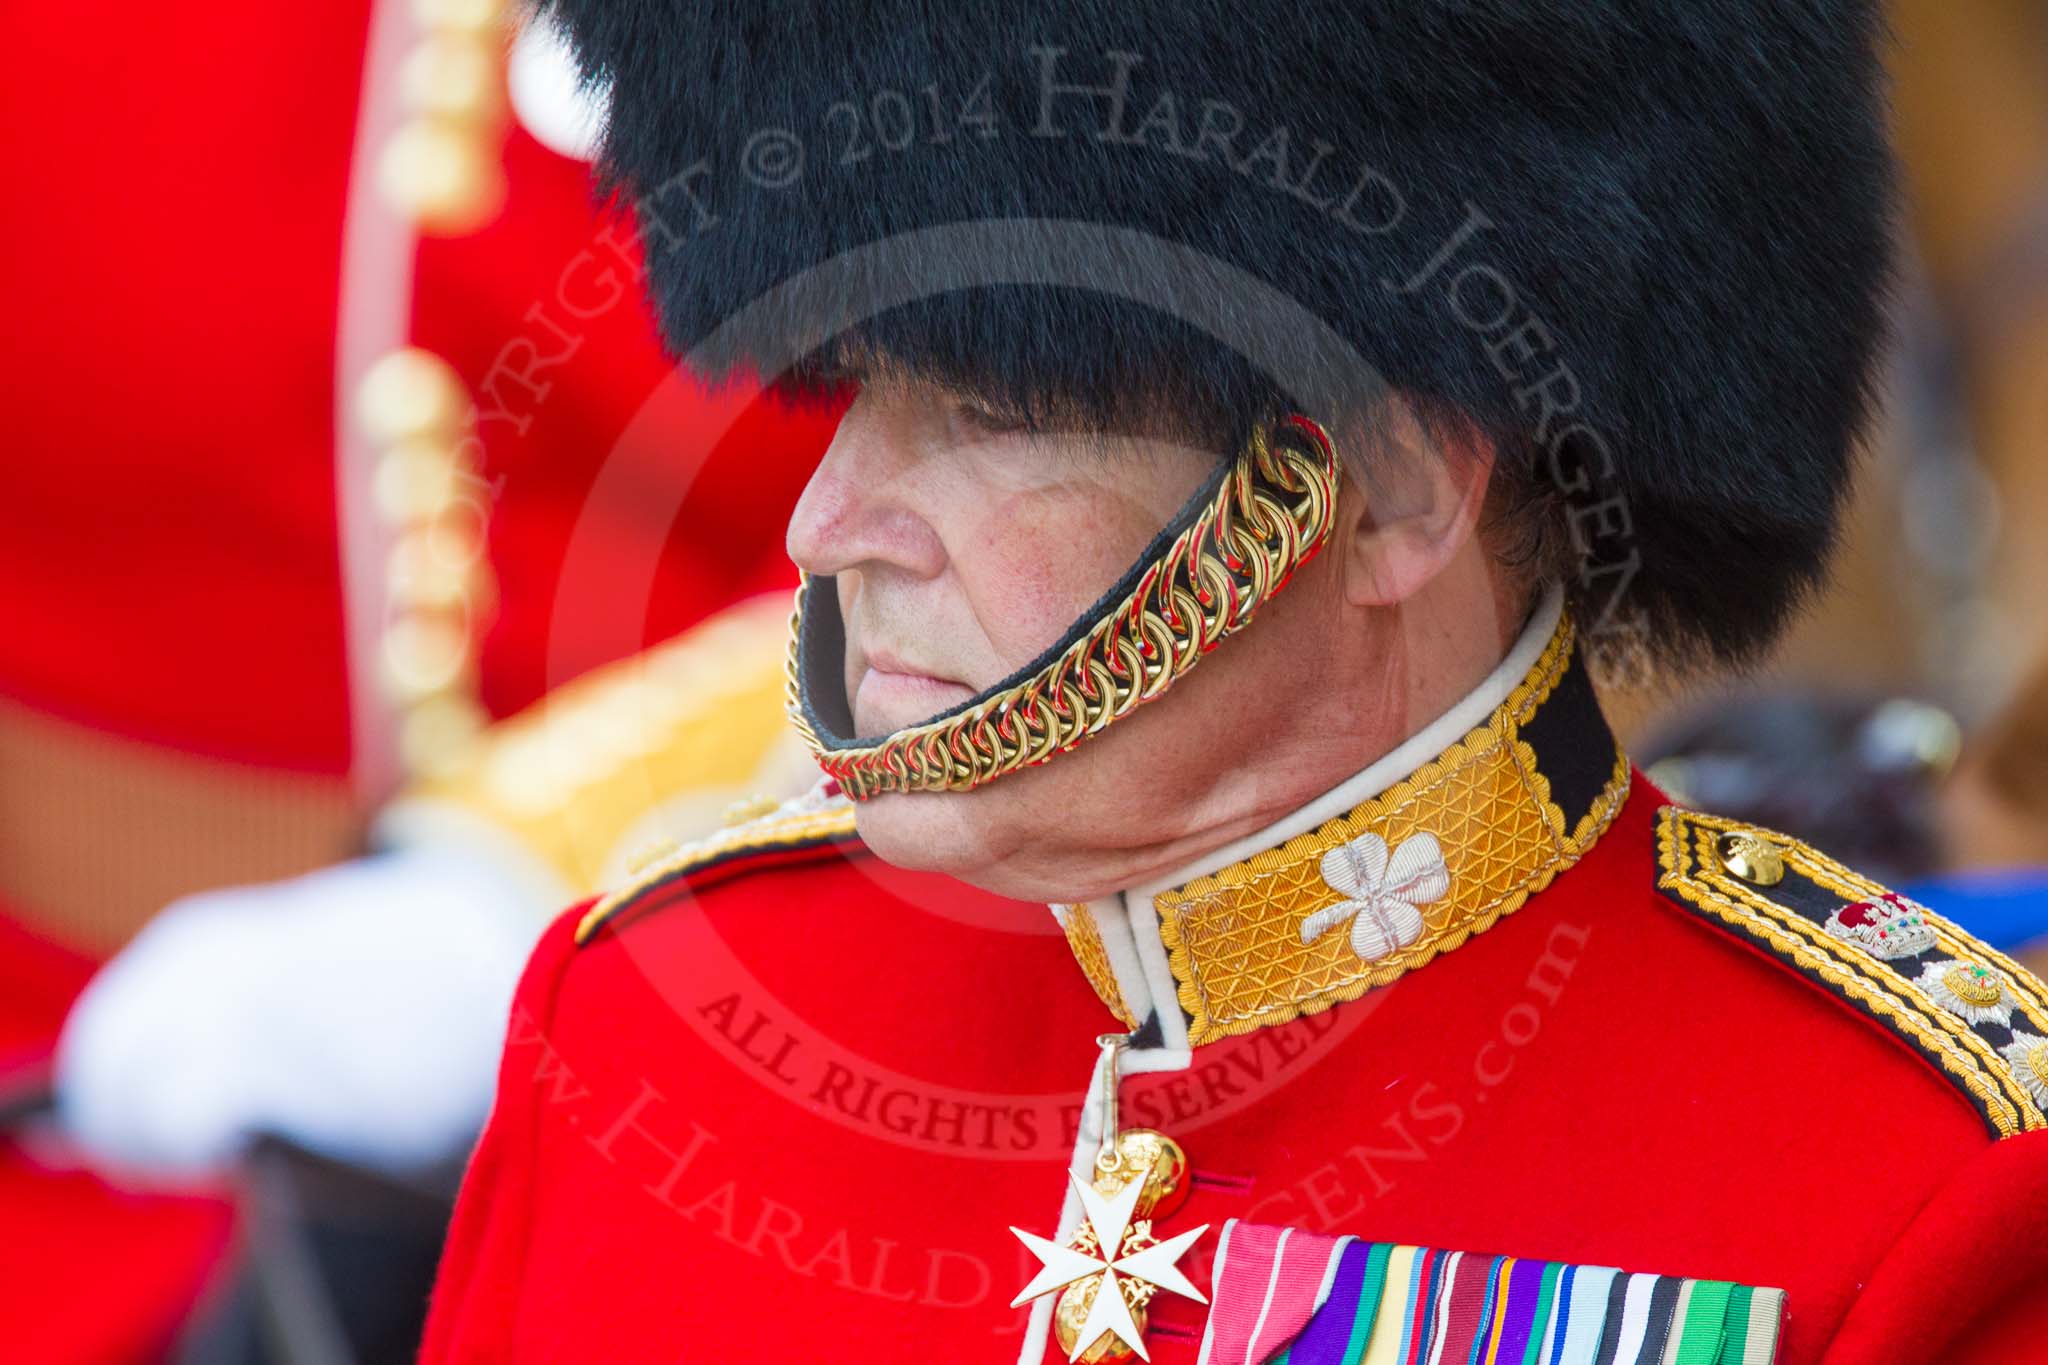 Trooping the Colour 2014.
Horse Guards Parade, Westminster,
London SW1A,

United Kingdom,
on 14 June 2014 at 11:03, image #405